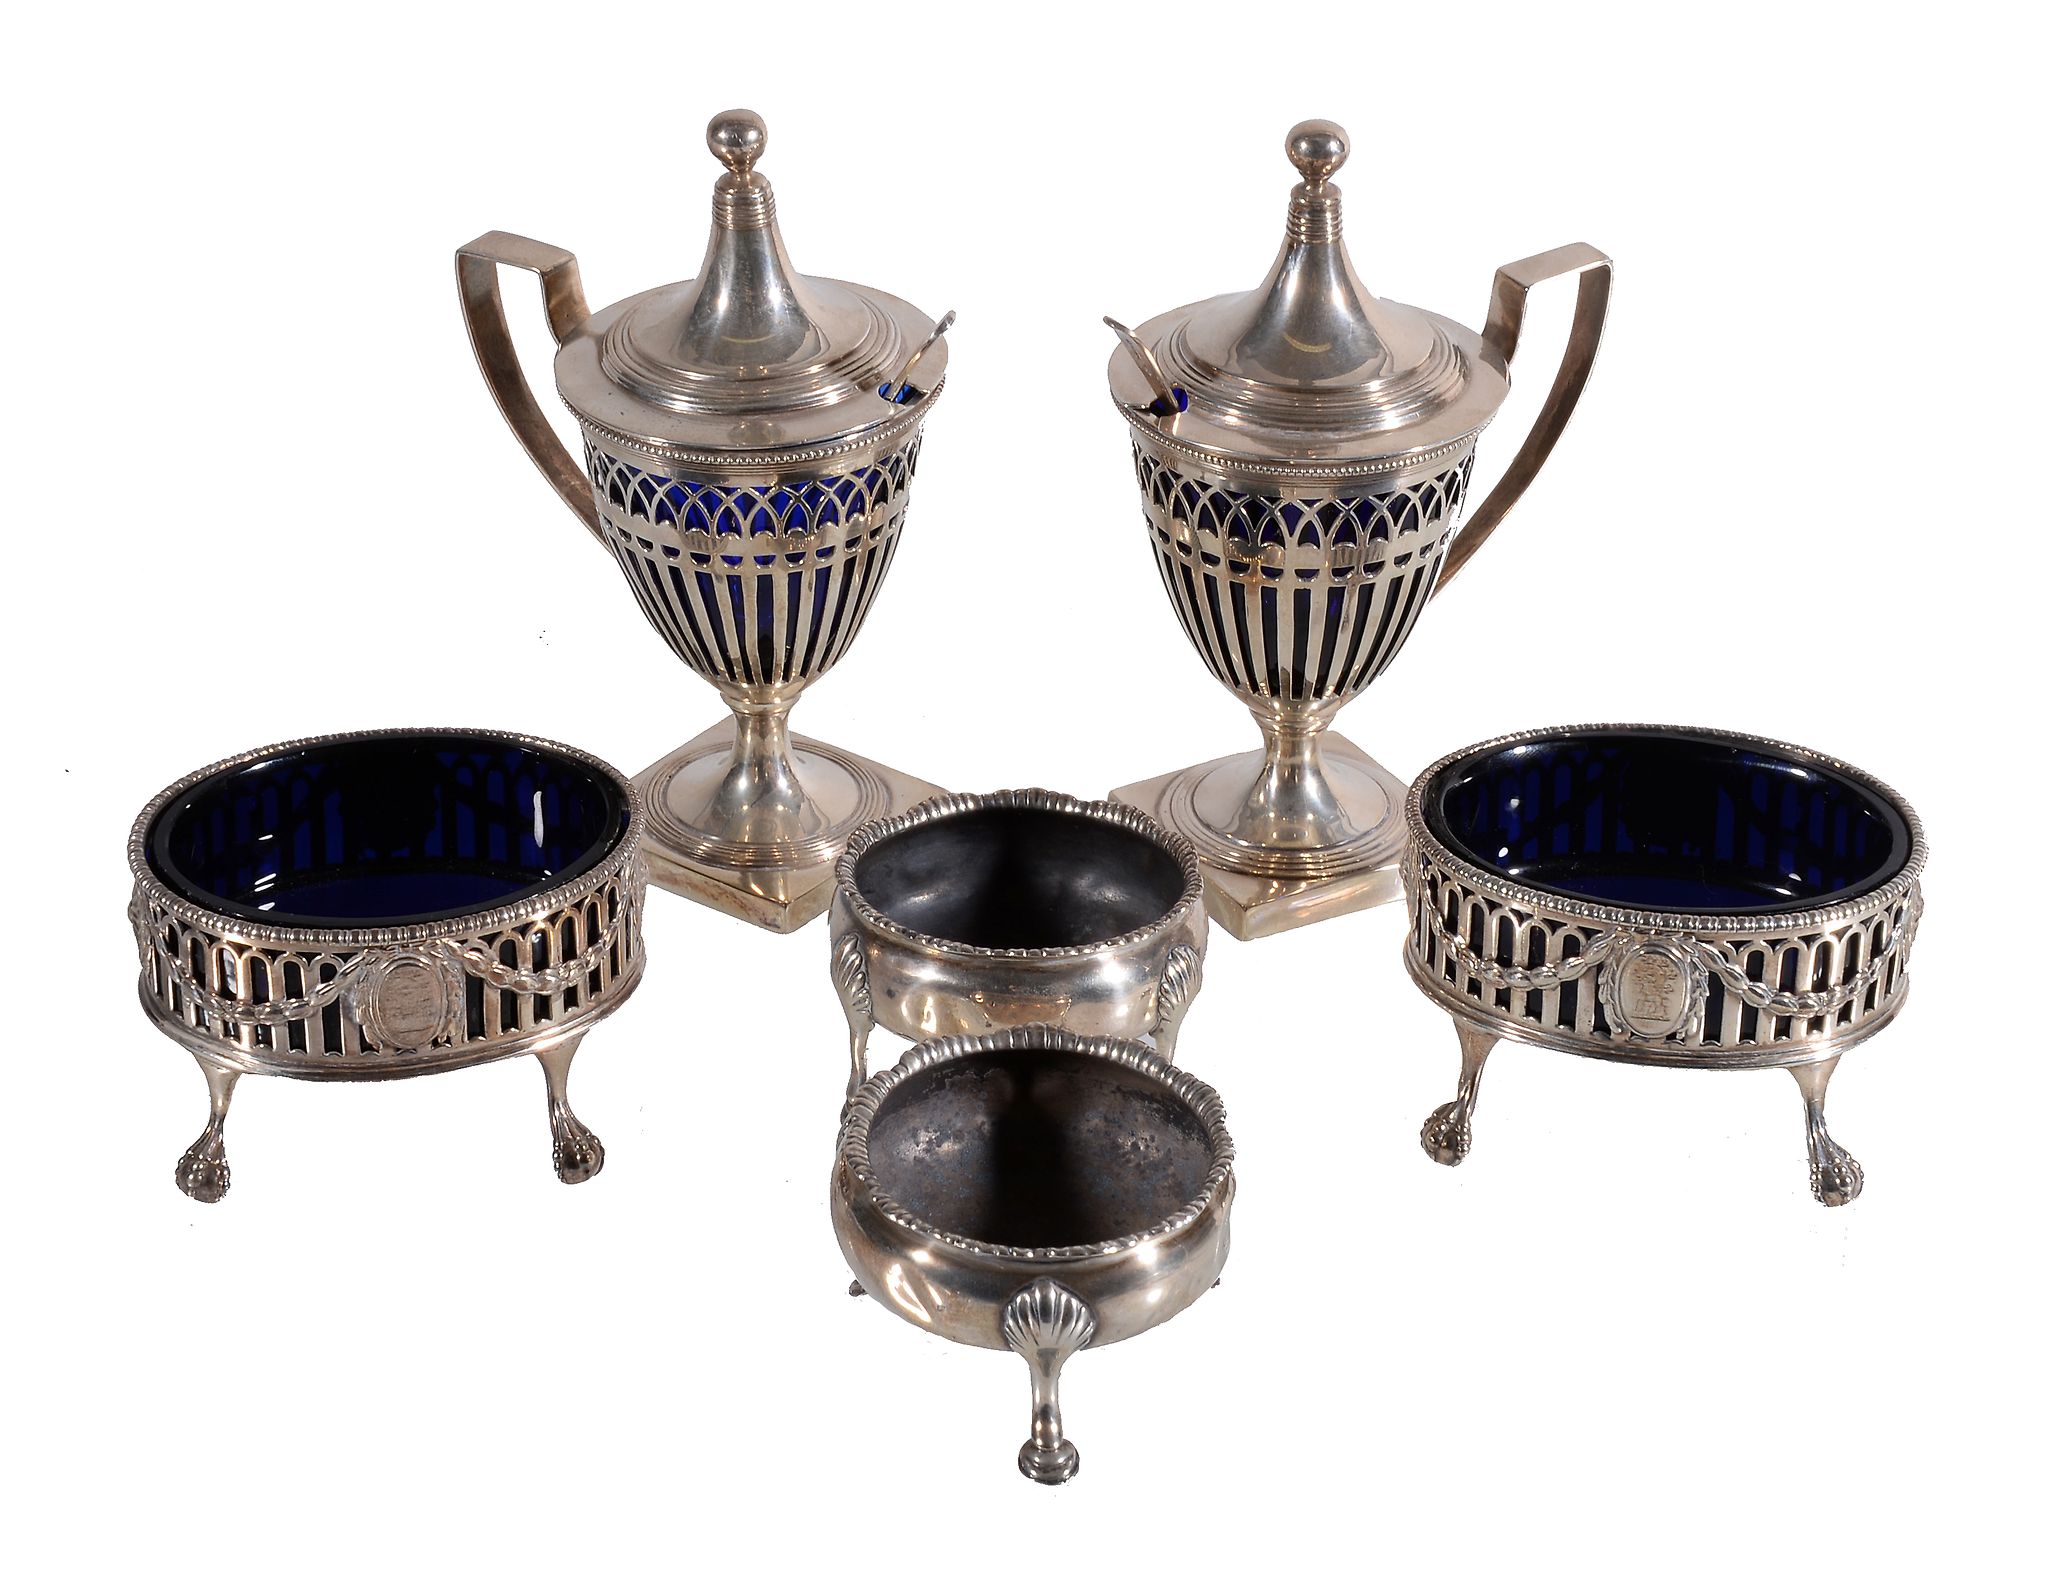 A pair of George III silver oval salts by Robert Hennell I, London 1775, with gadrooned borders,